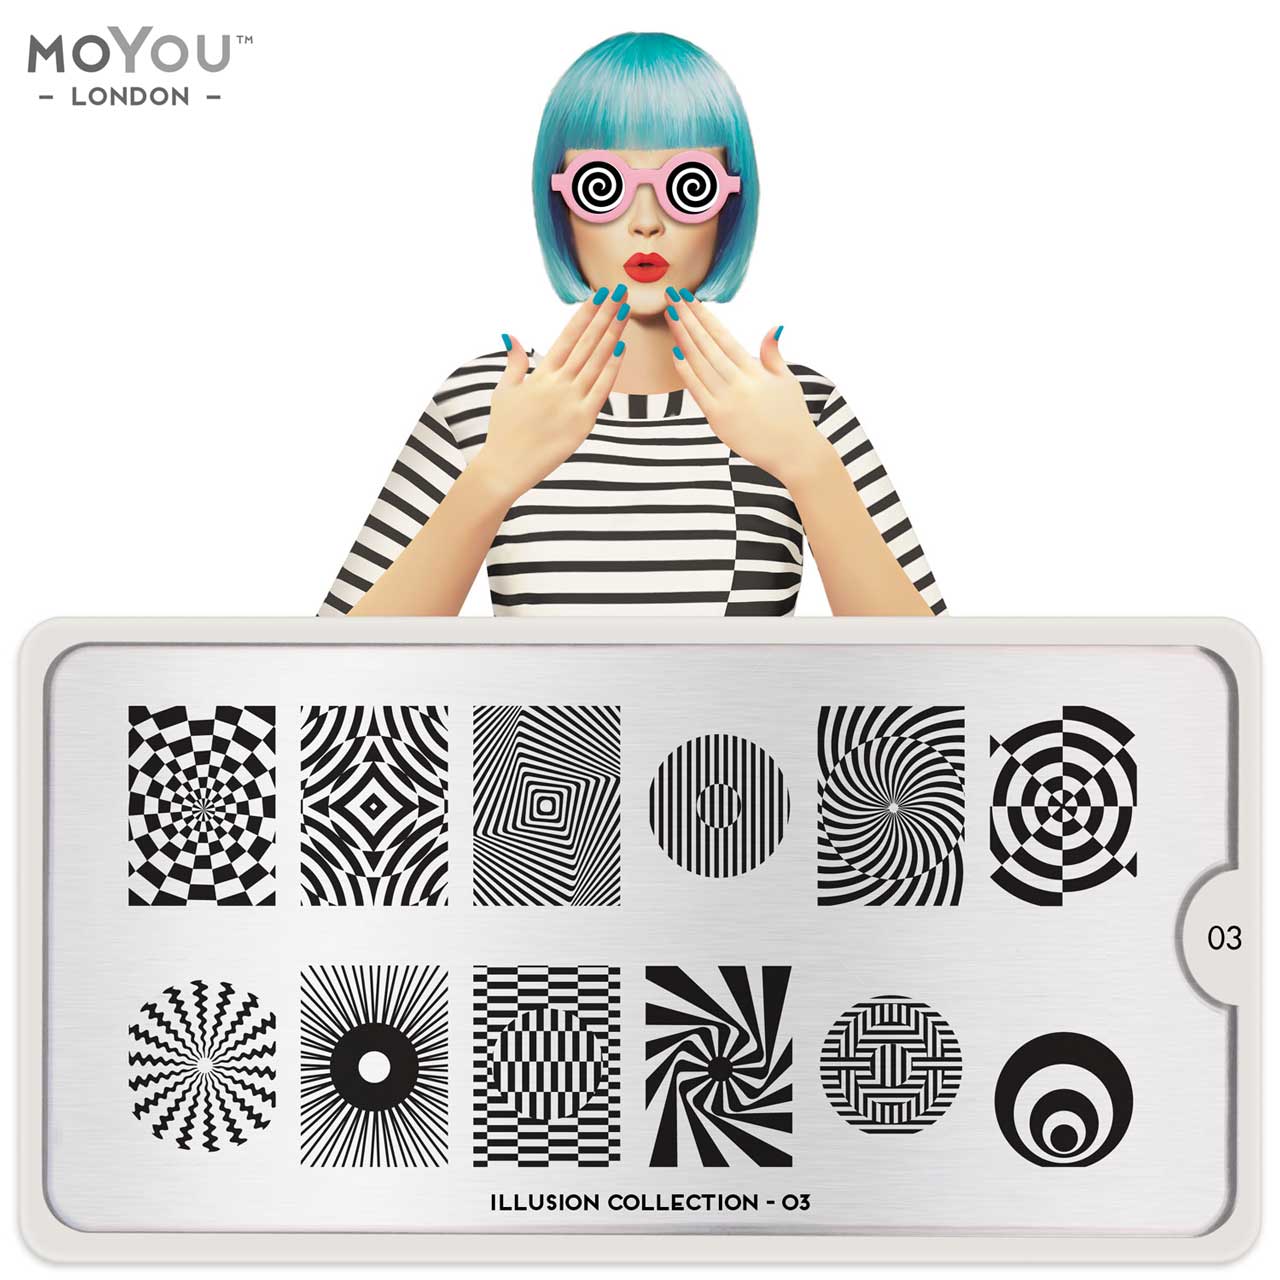 Plaque Stamping Illusion 03 - MoYou London